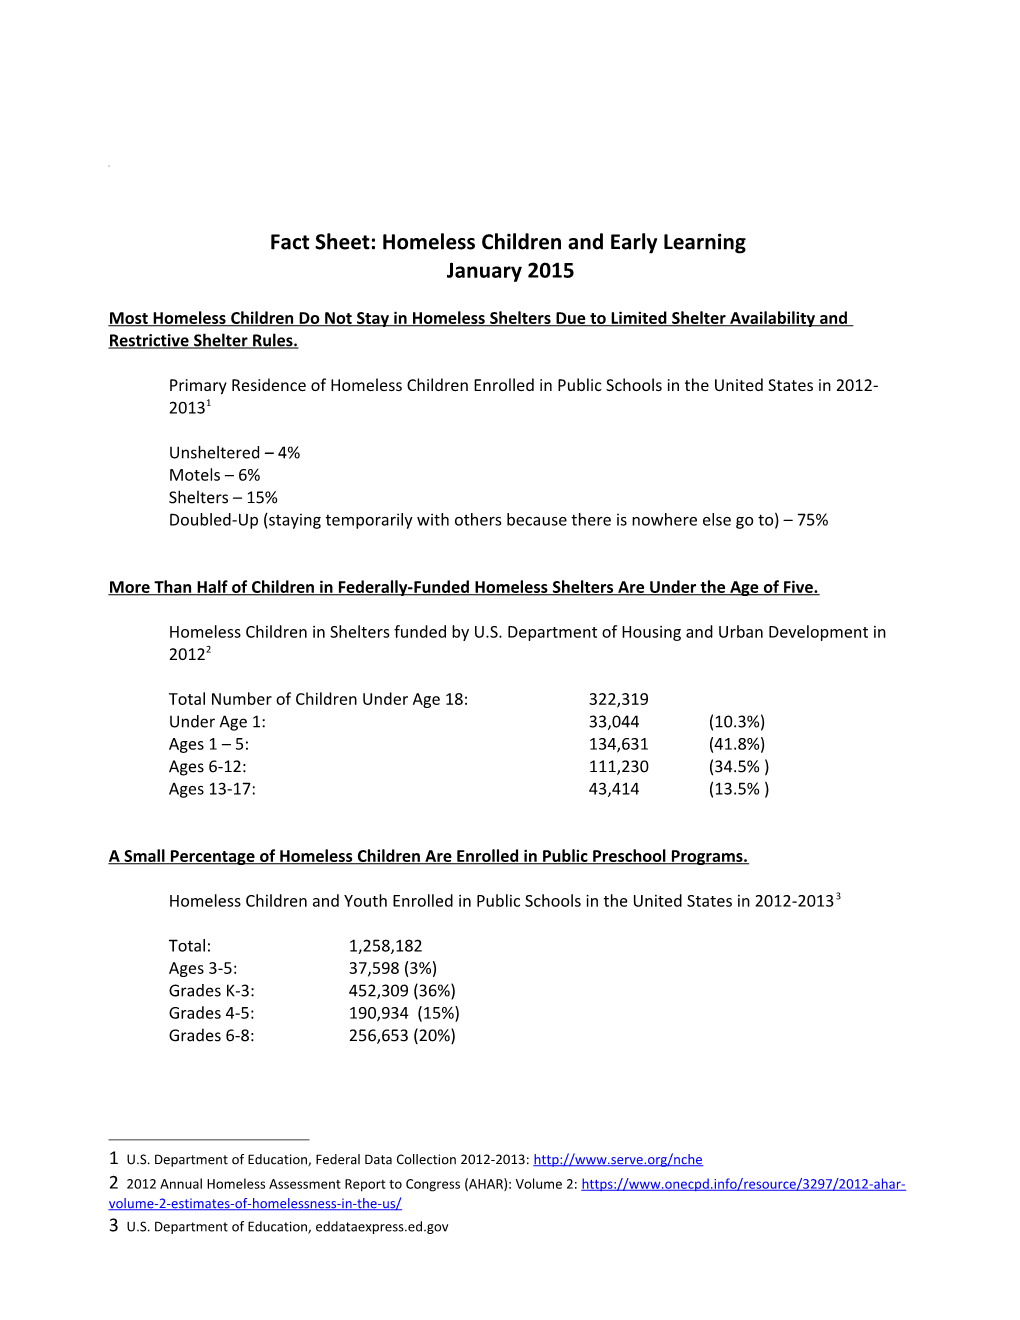 Homeless Children and Early Learning March 2014